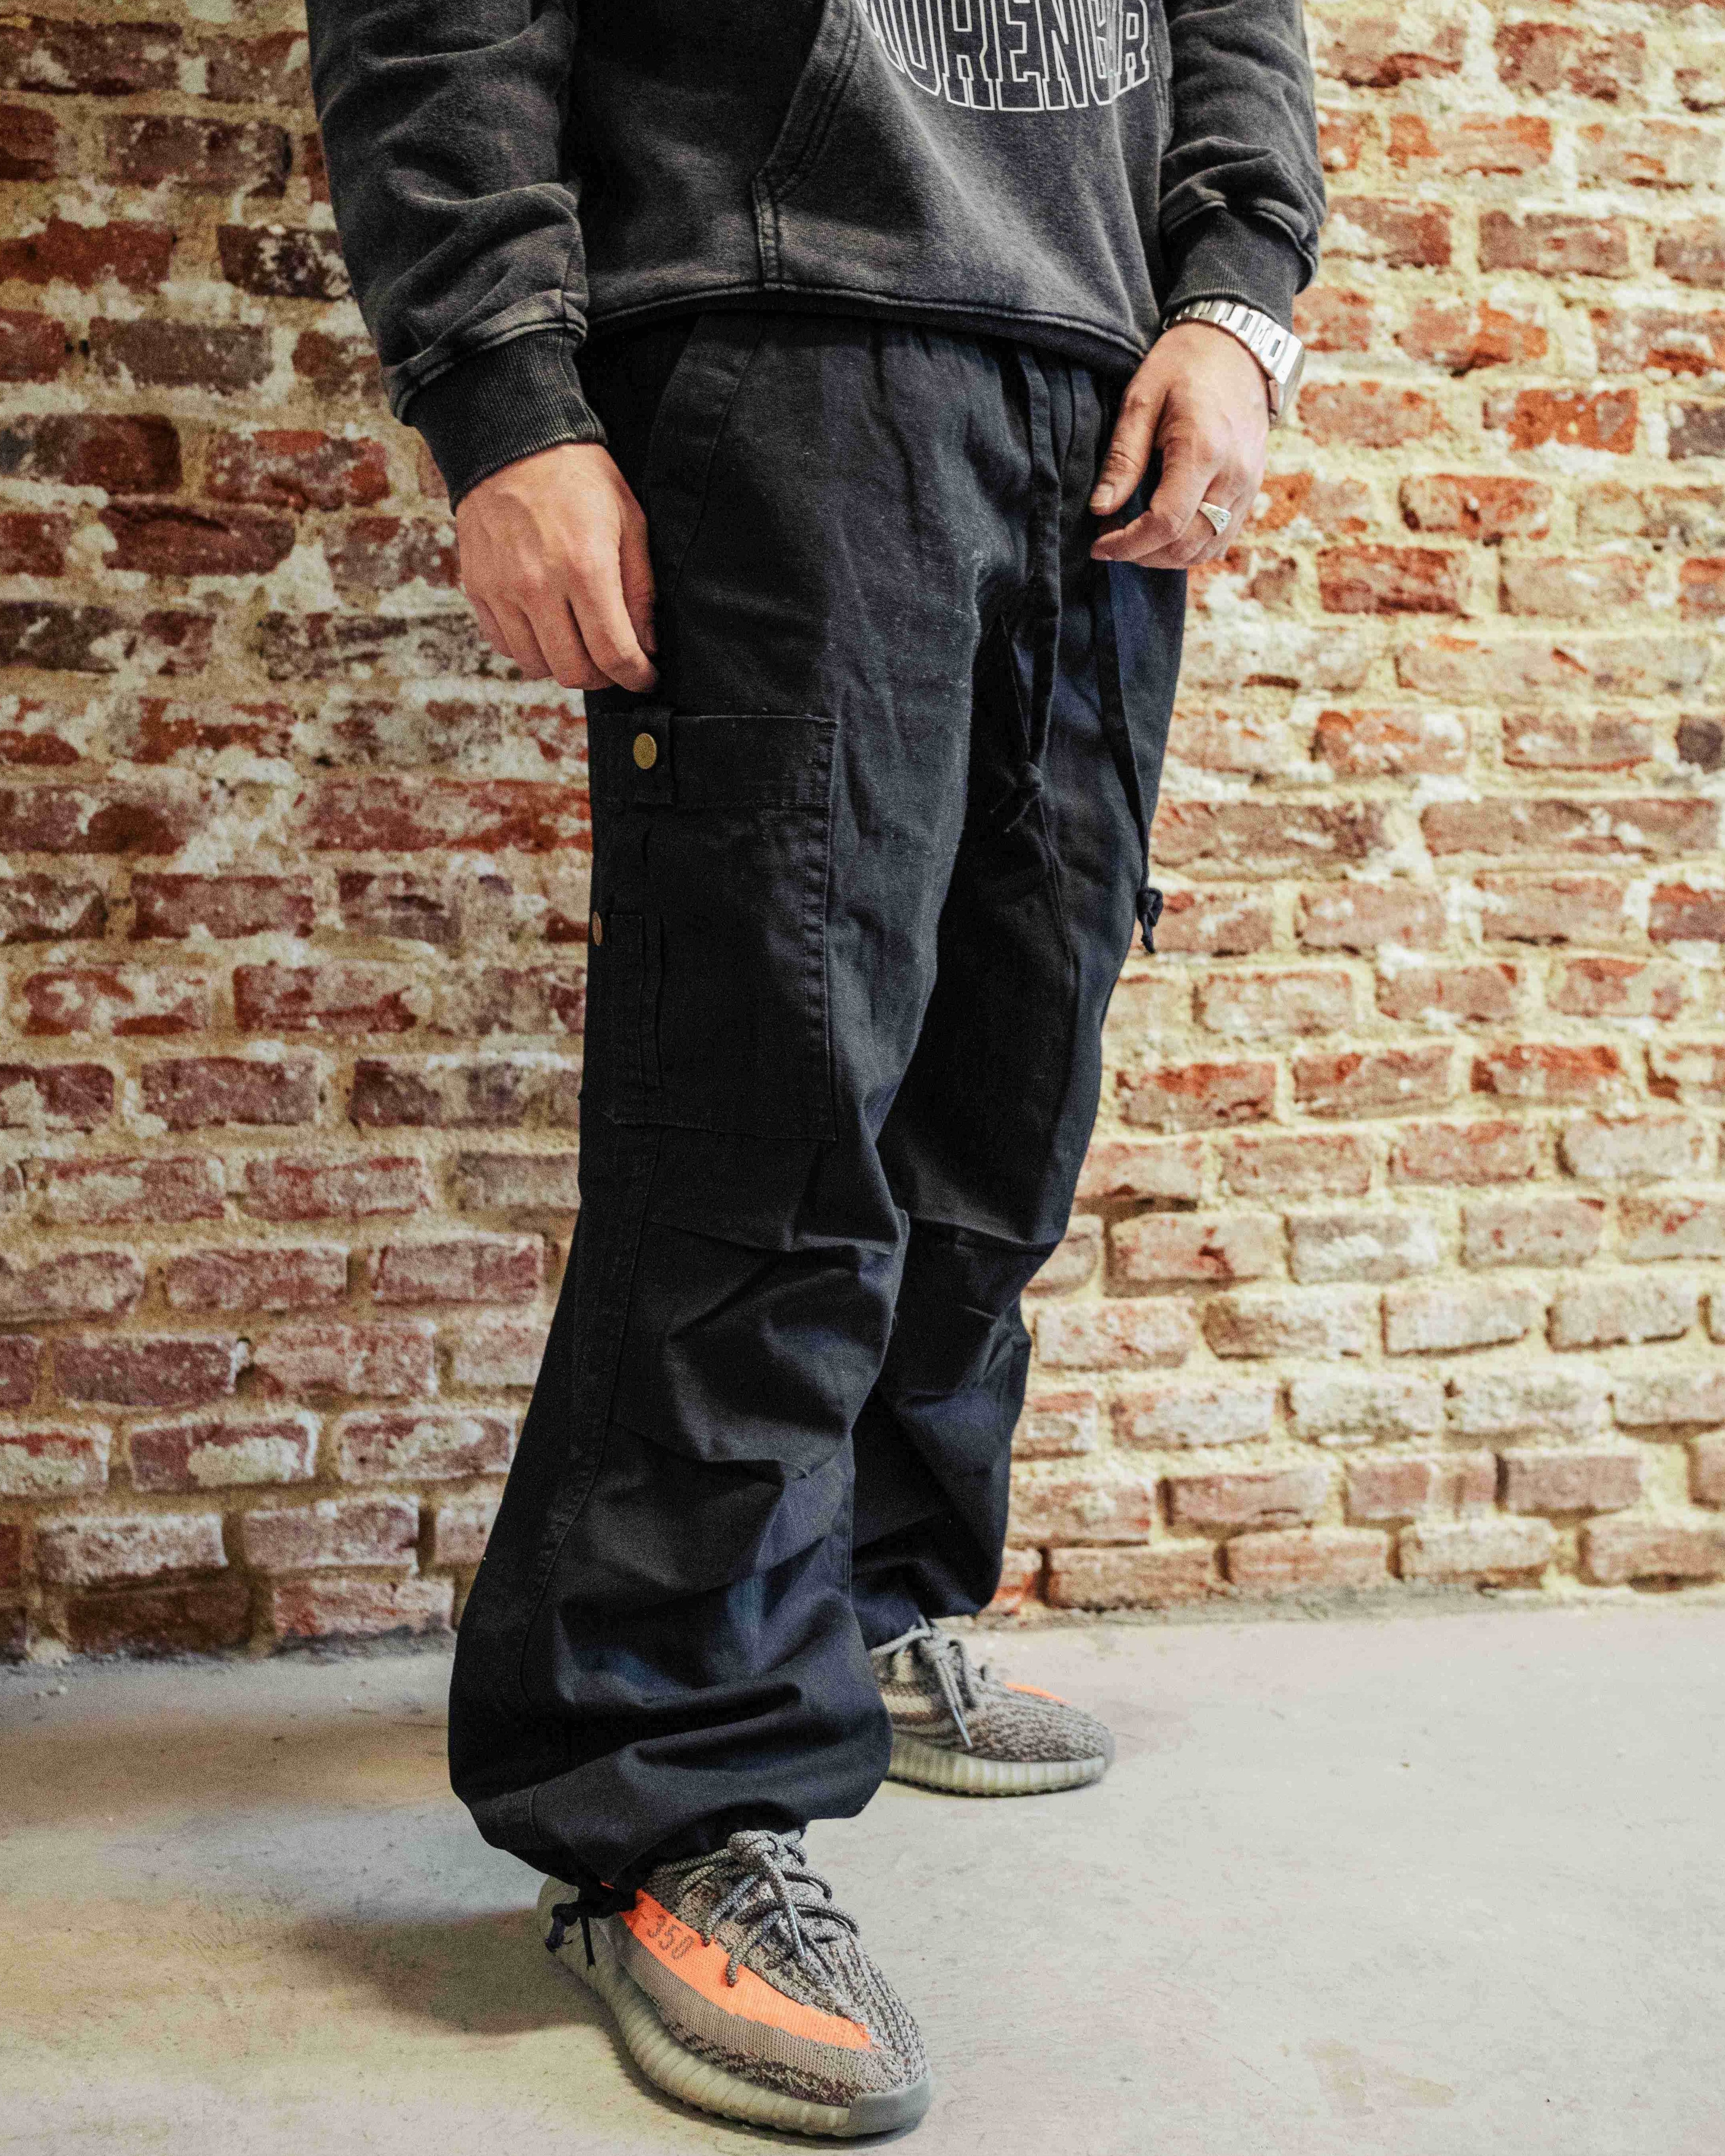 CARGO PANTS RELAXED FIT | BLACK